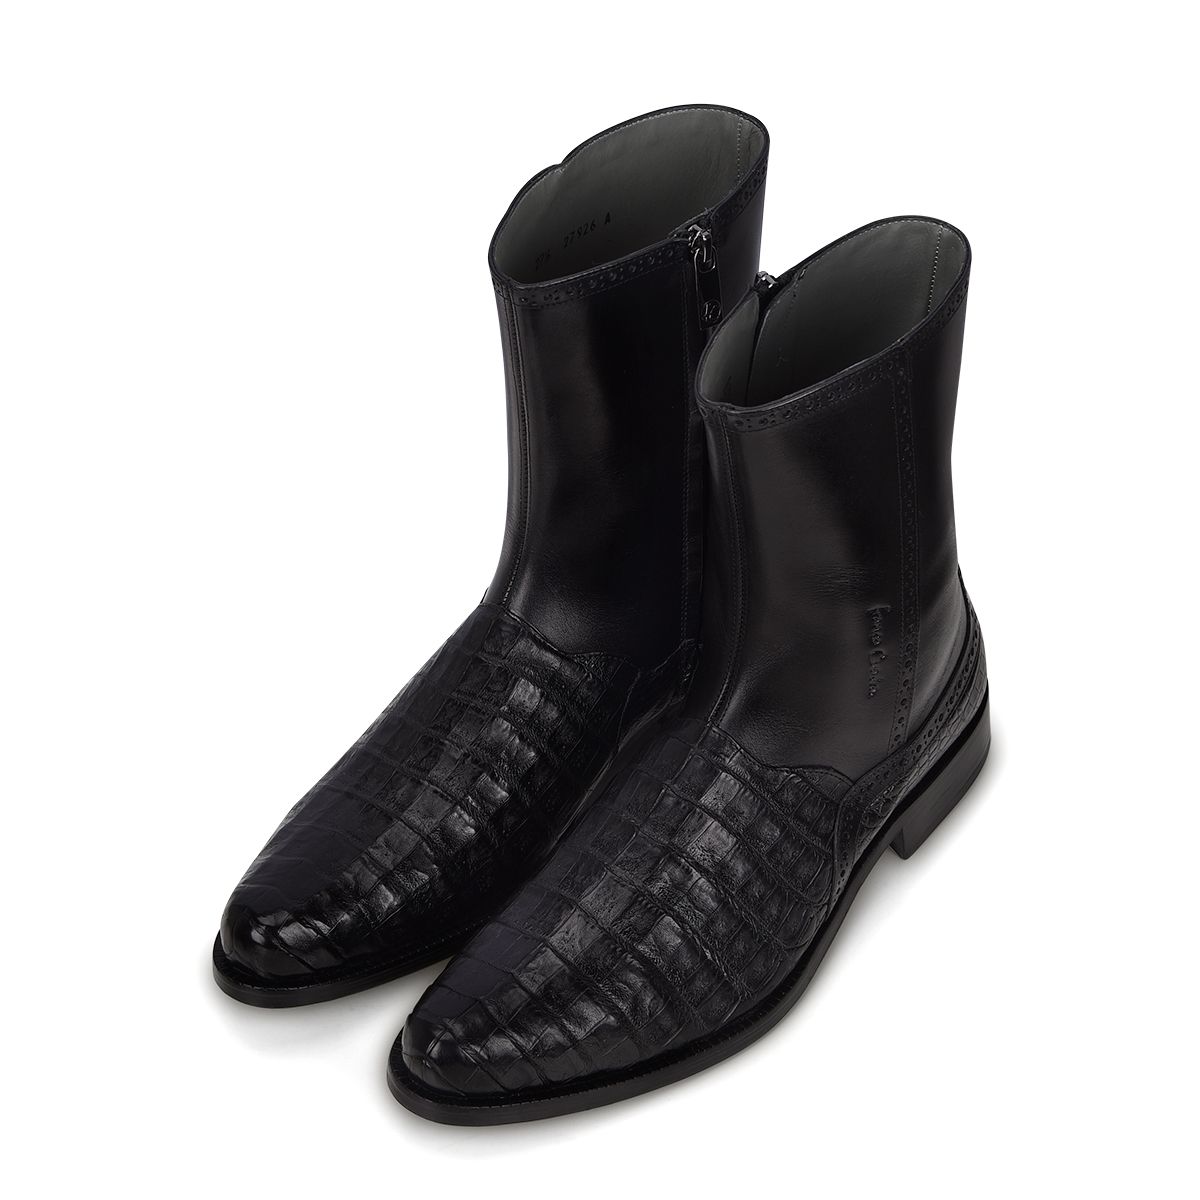 827FWTS - Franco Cuadra black dress casual caiman leather ankle boots for men-Kuet.us